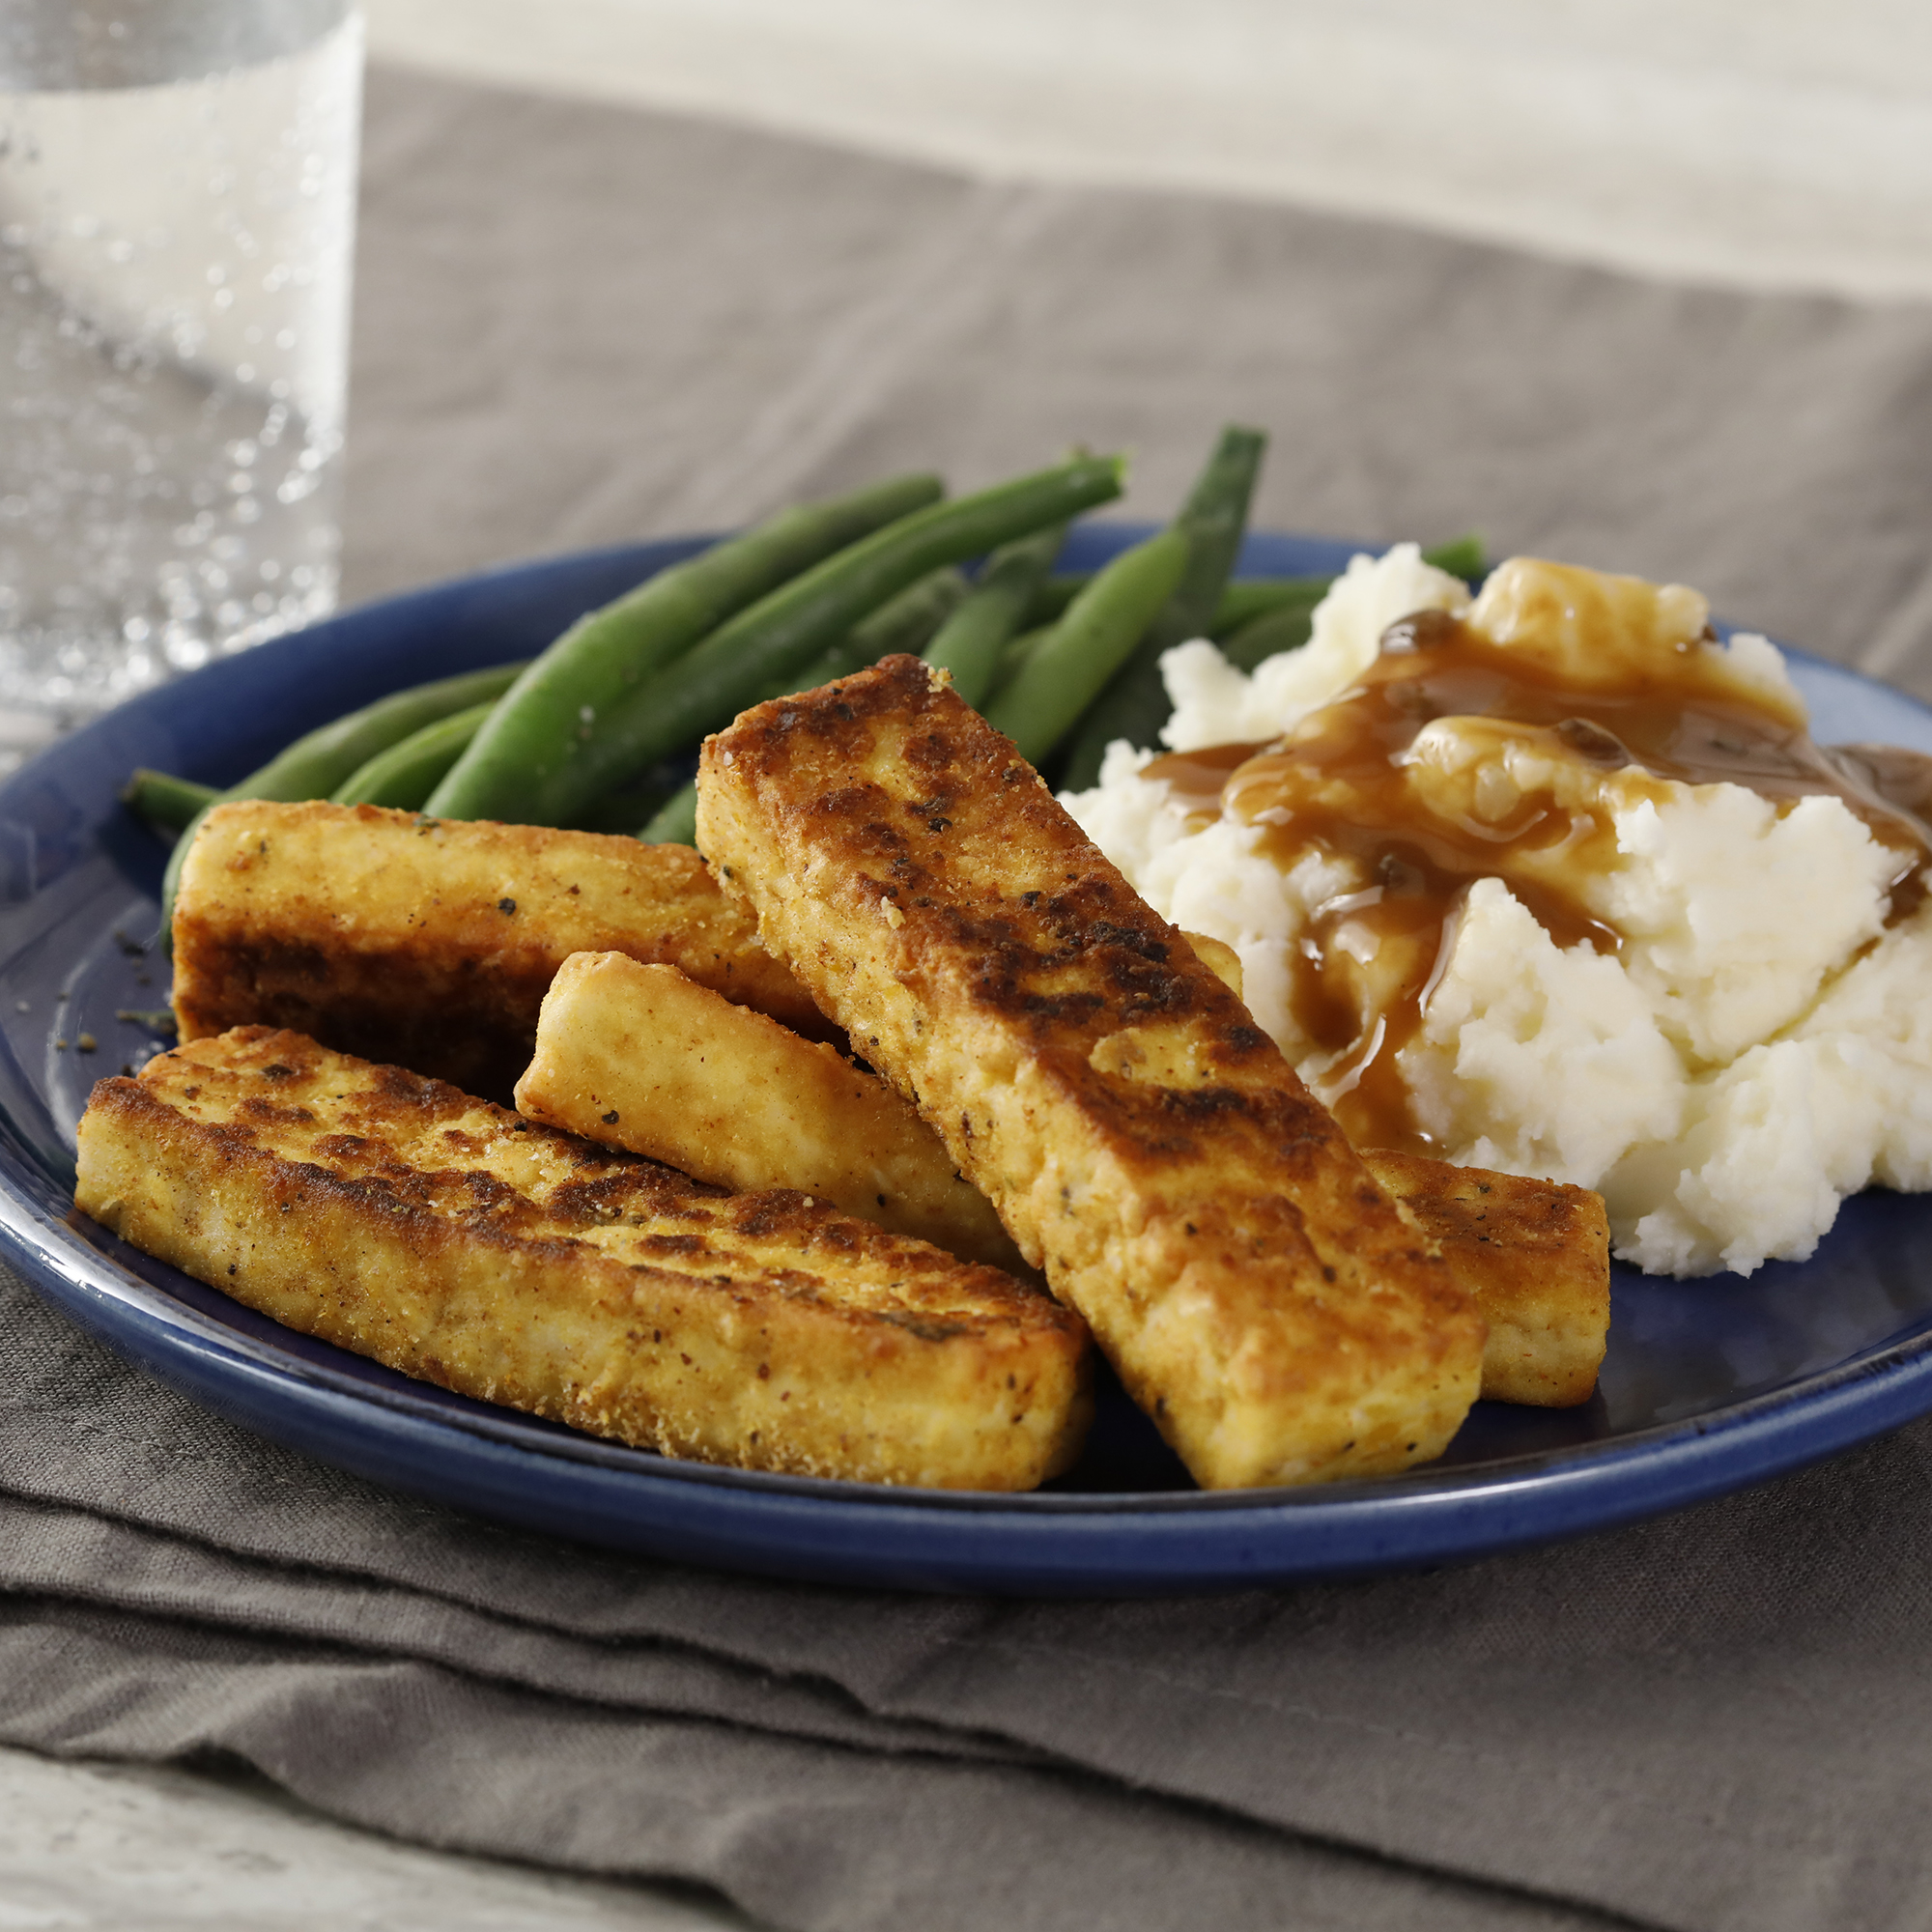 close up view of Breaded, Fried, Softly Spiced Tofu served with green beans and mashed potatoes and gravy on a blue plate